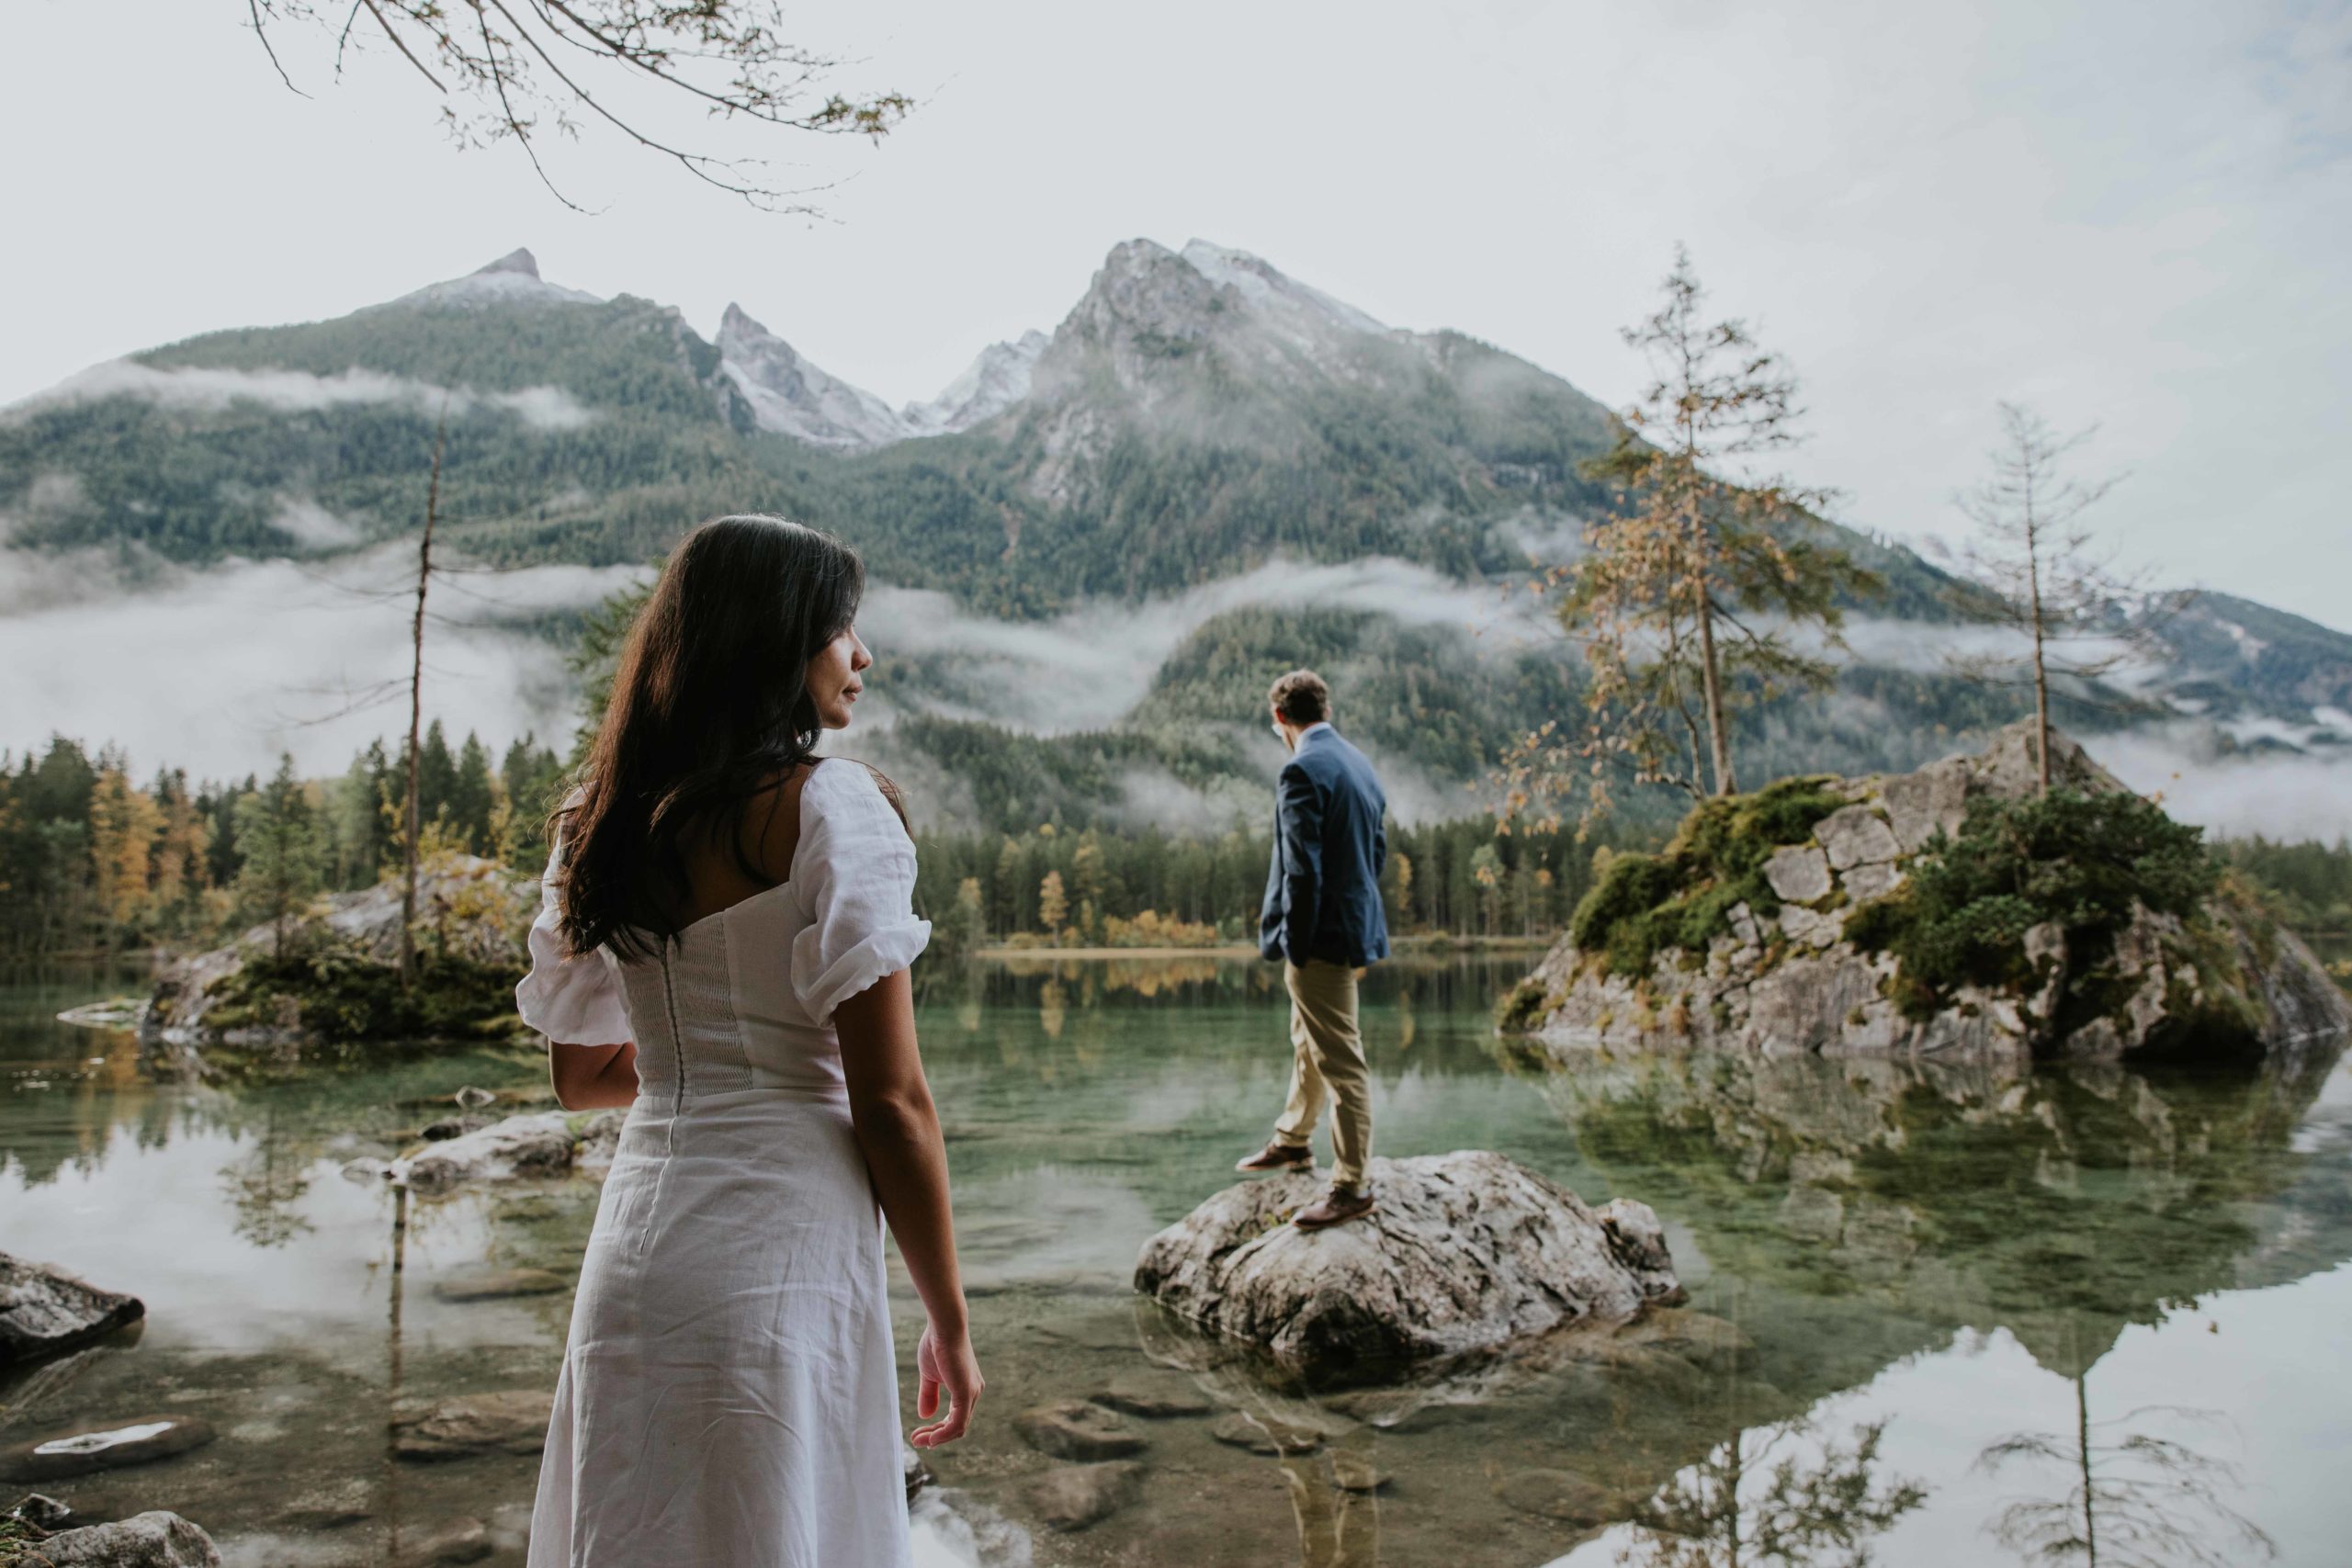 Berchtesgaden, Germany elopement photos of a couple standing on large stones in the water with mountains in the background. She is facing to the side and he has his back to the camera.